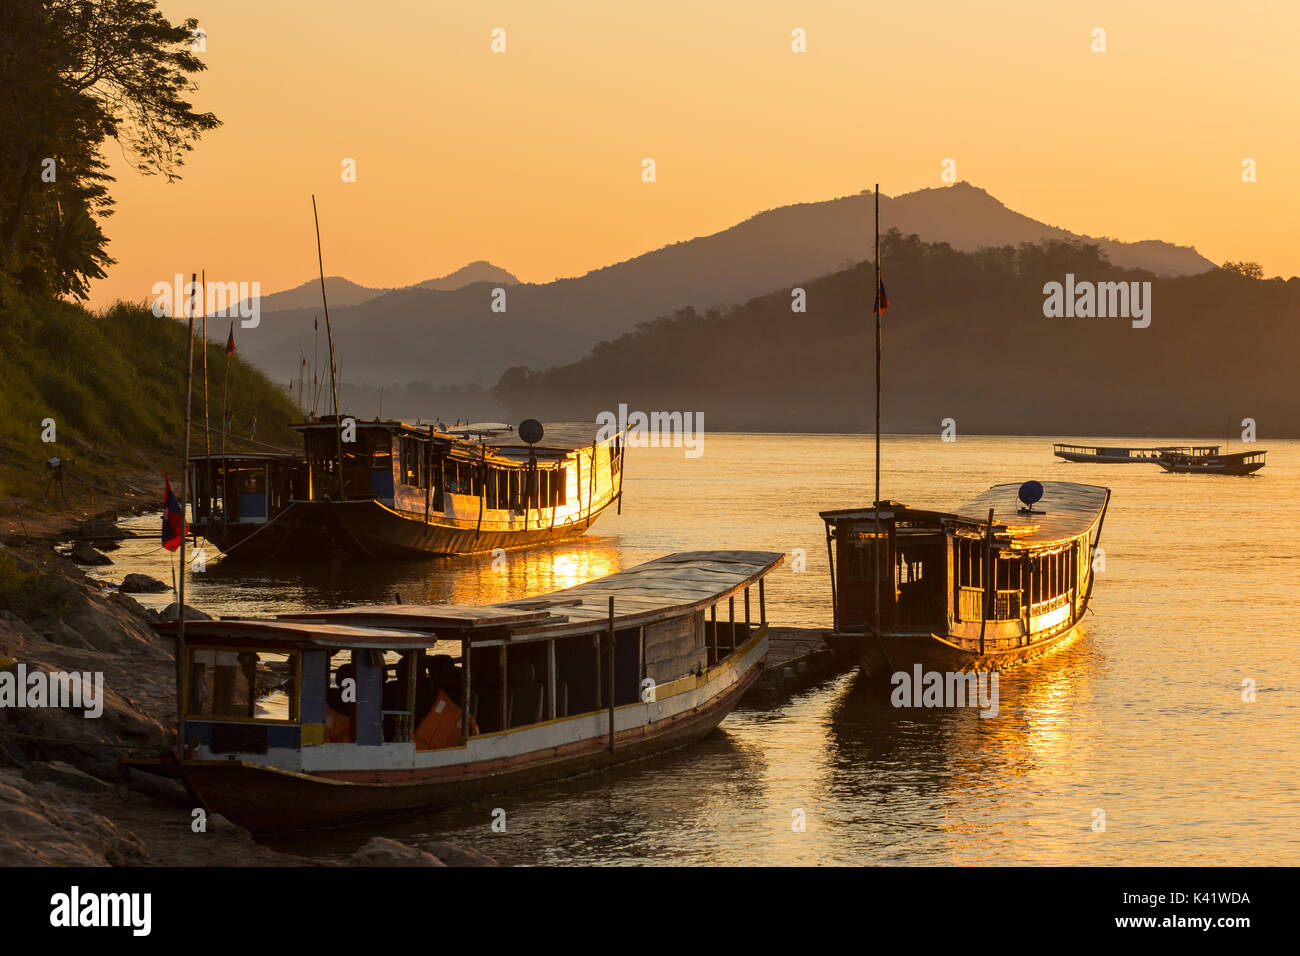 Mekong River High Resolution Stock Photography and Images   Alamy